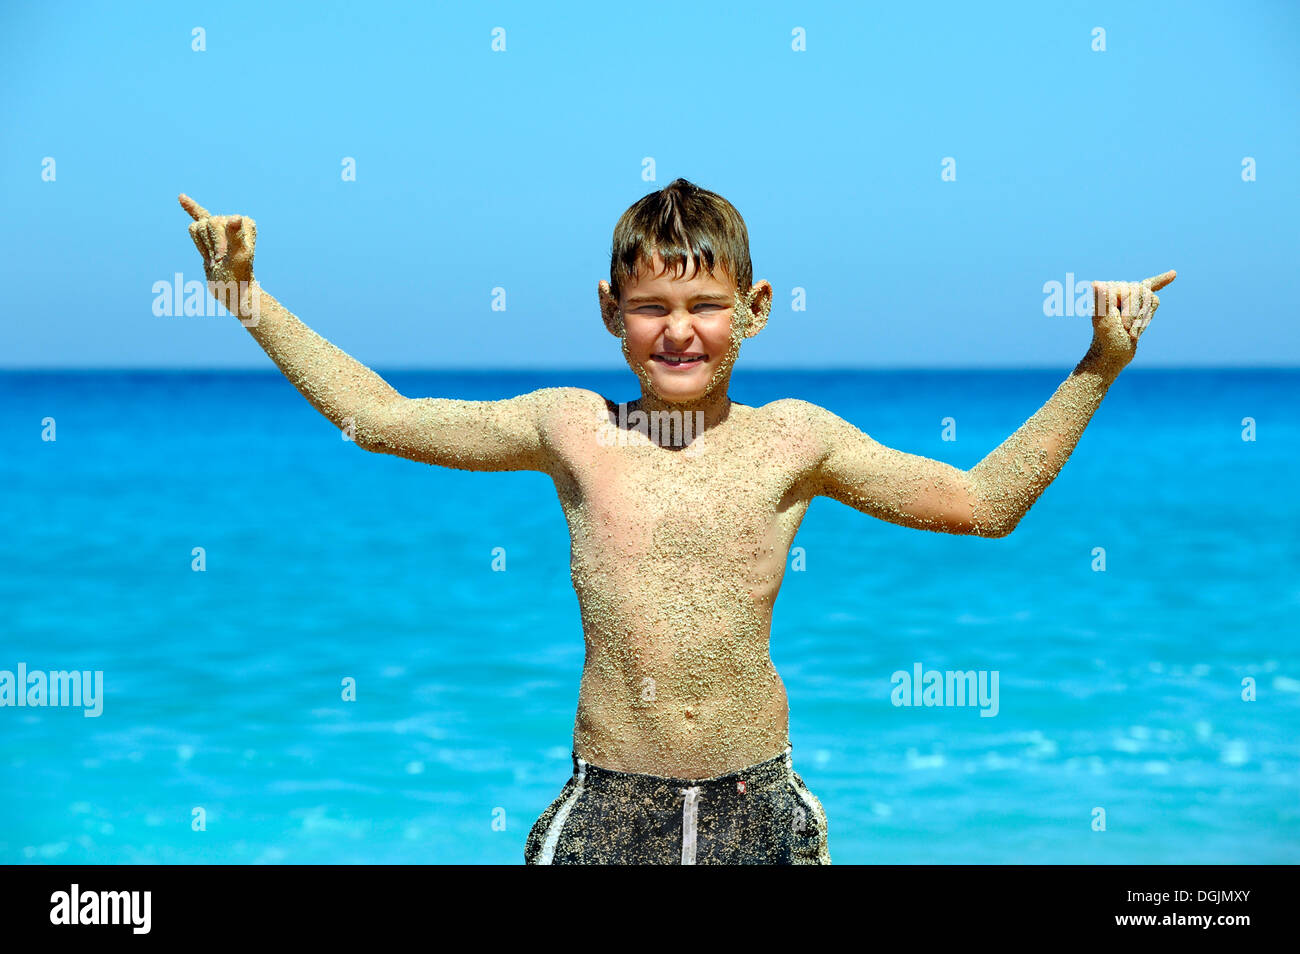 Boy, 9 years, standing on the beach with a sand-covered torso and raising his arms, Kathisma, Lefkas or Lefkada, Greece, Europe Stock Photo